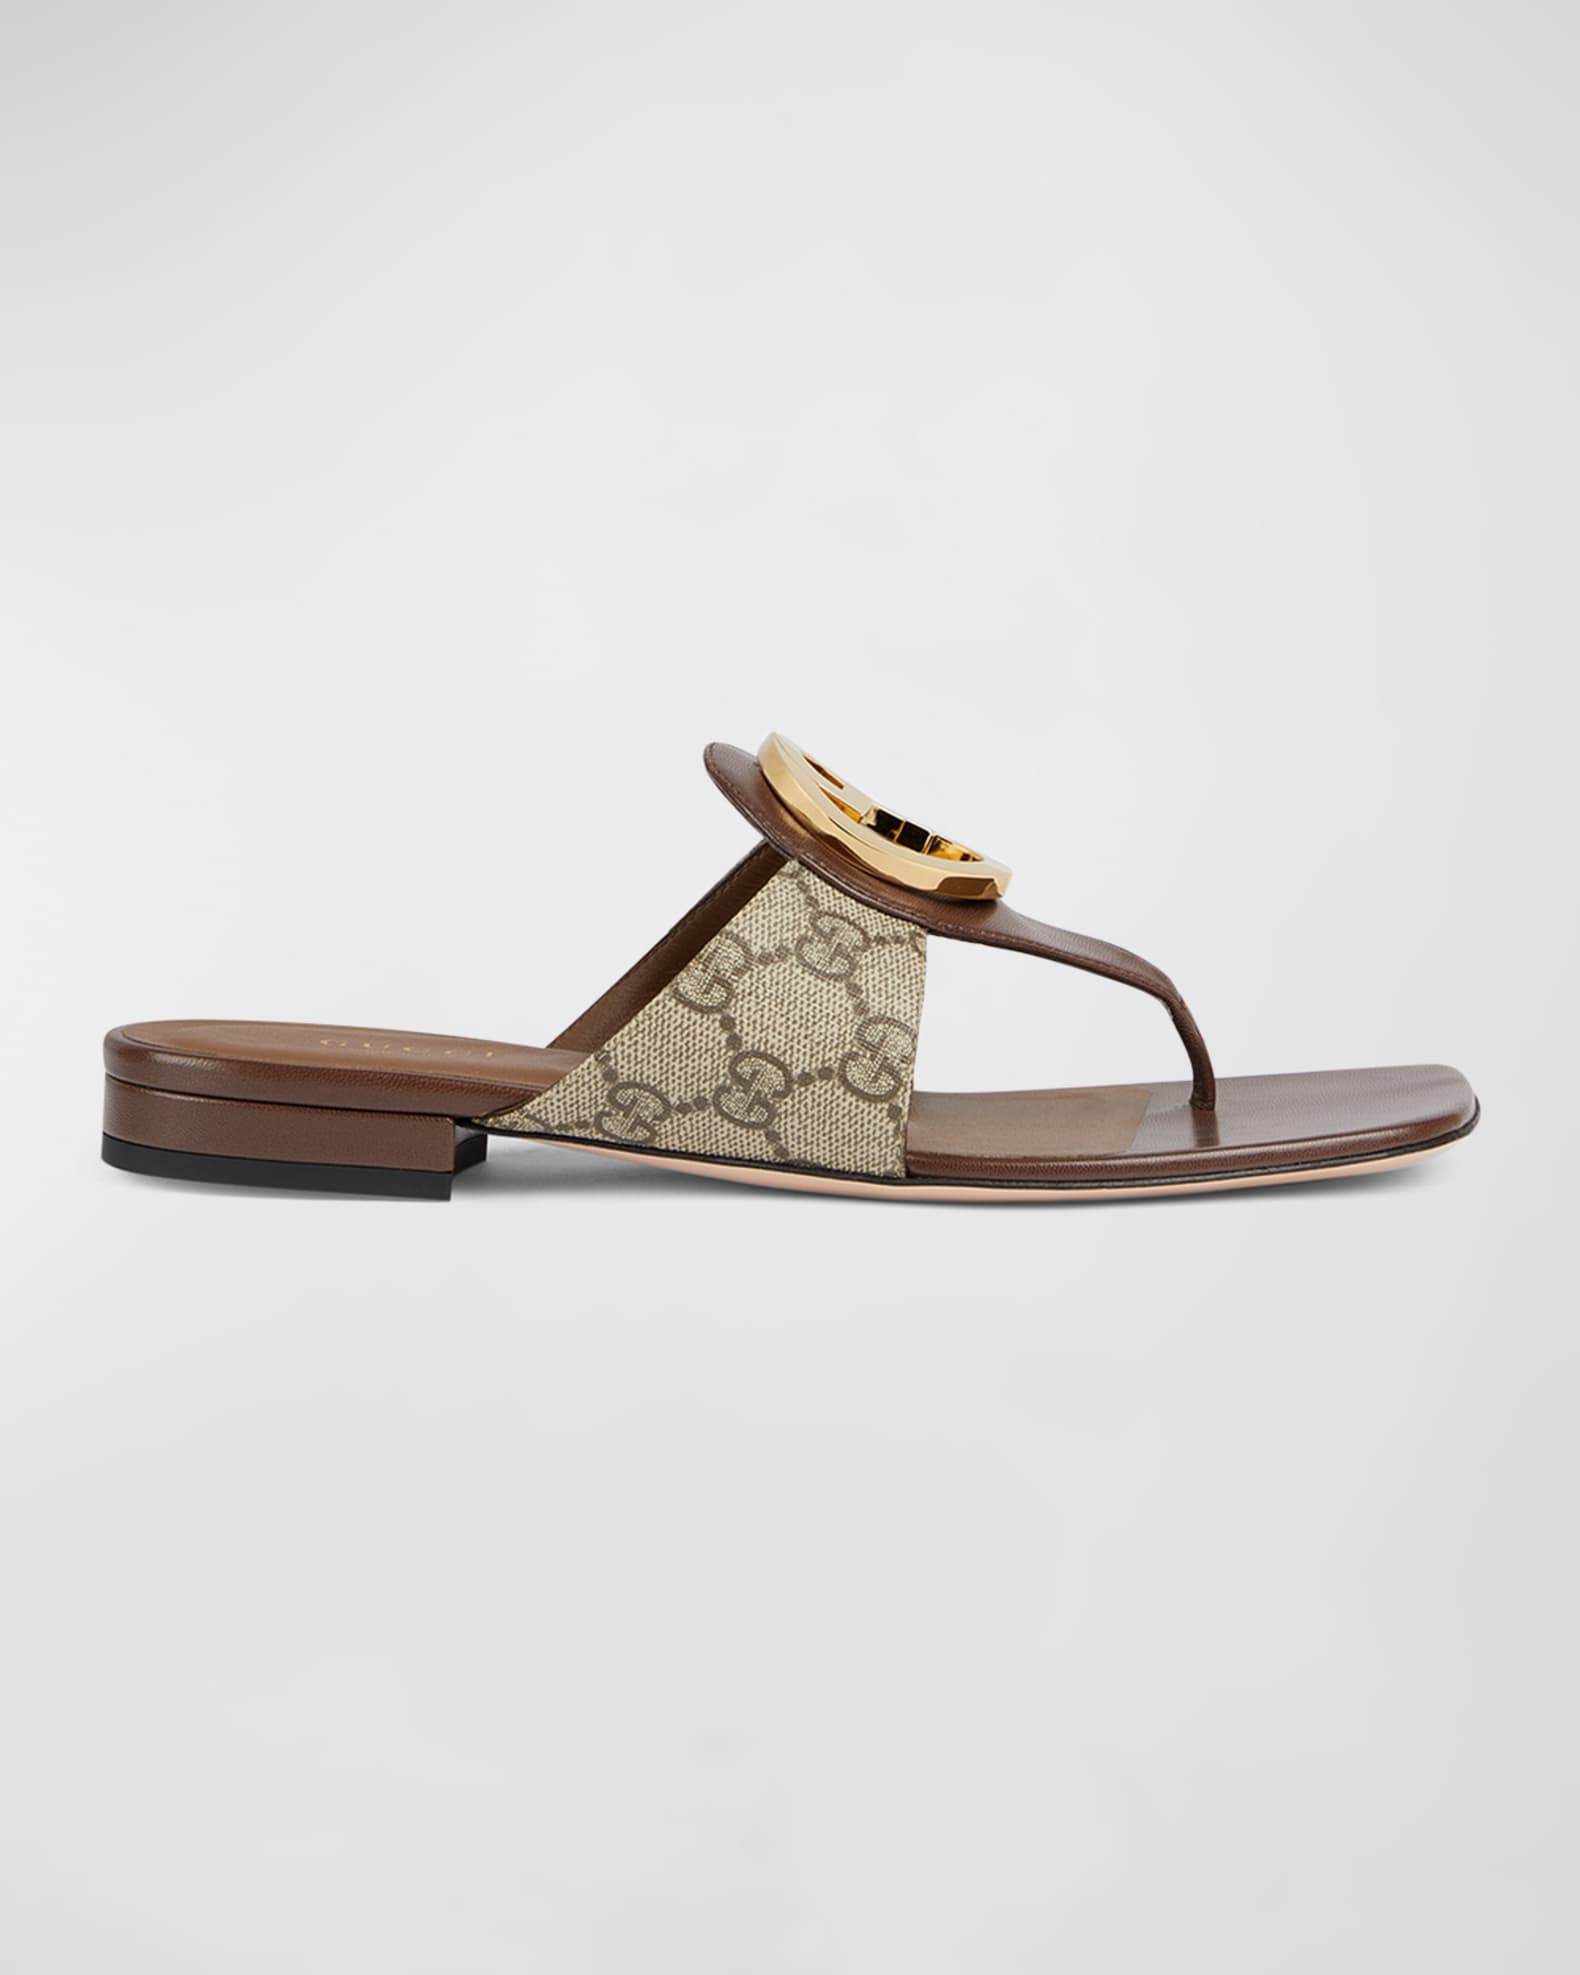 GUCCI Woman's Leather Sandals